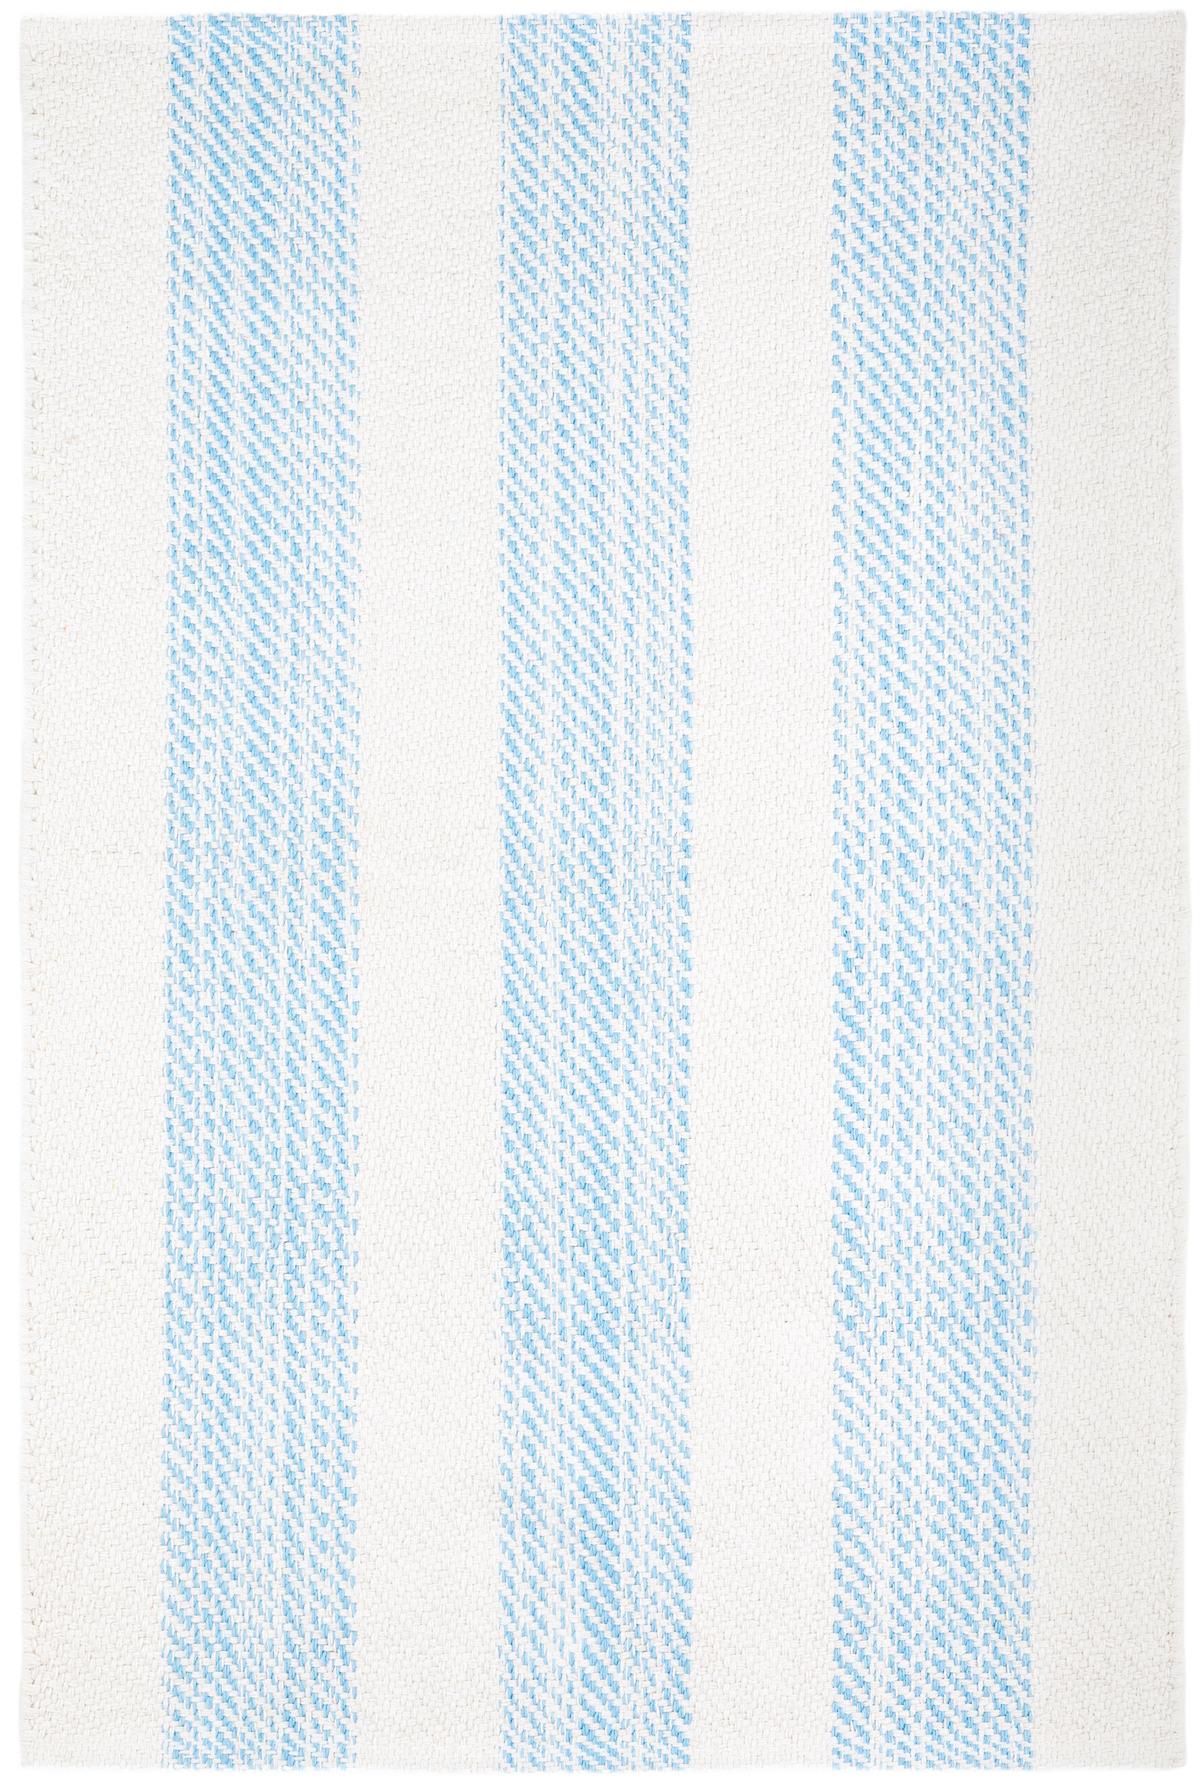 Cruise Stripe Blue Woven Cotton Rug, Blue And White Stripped Rug